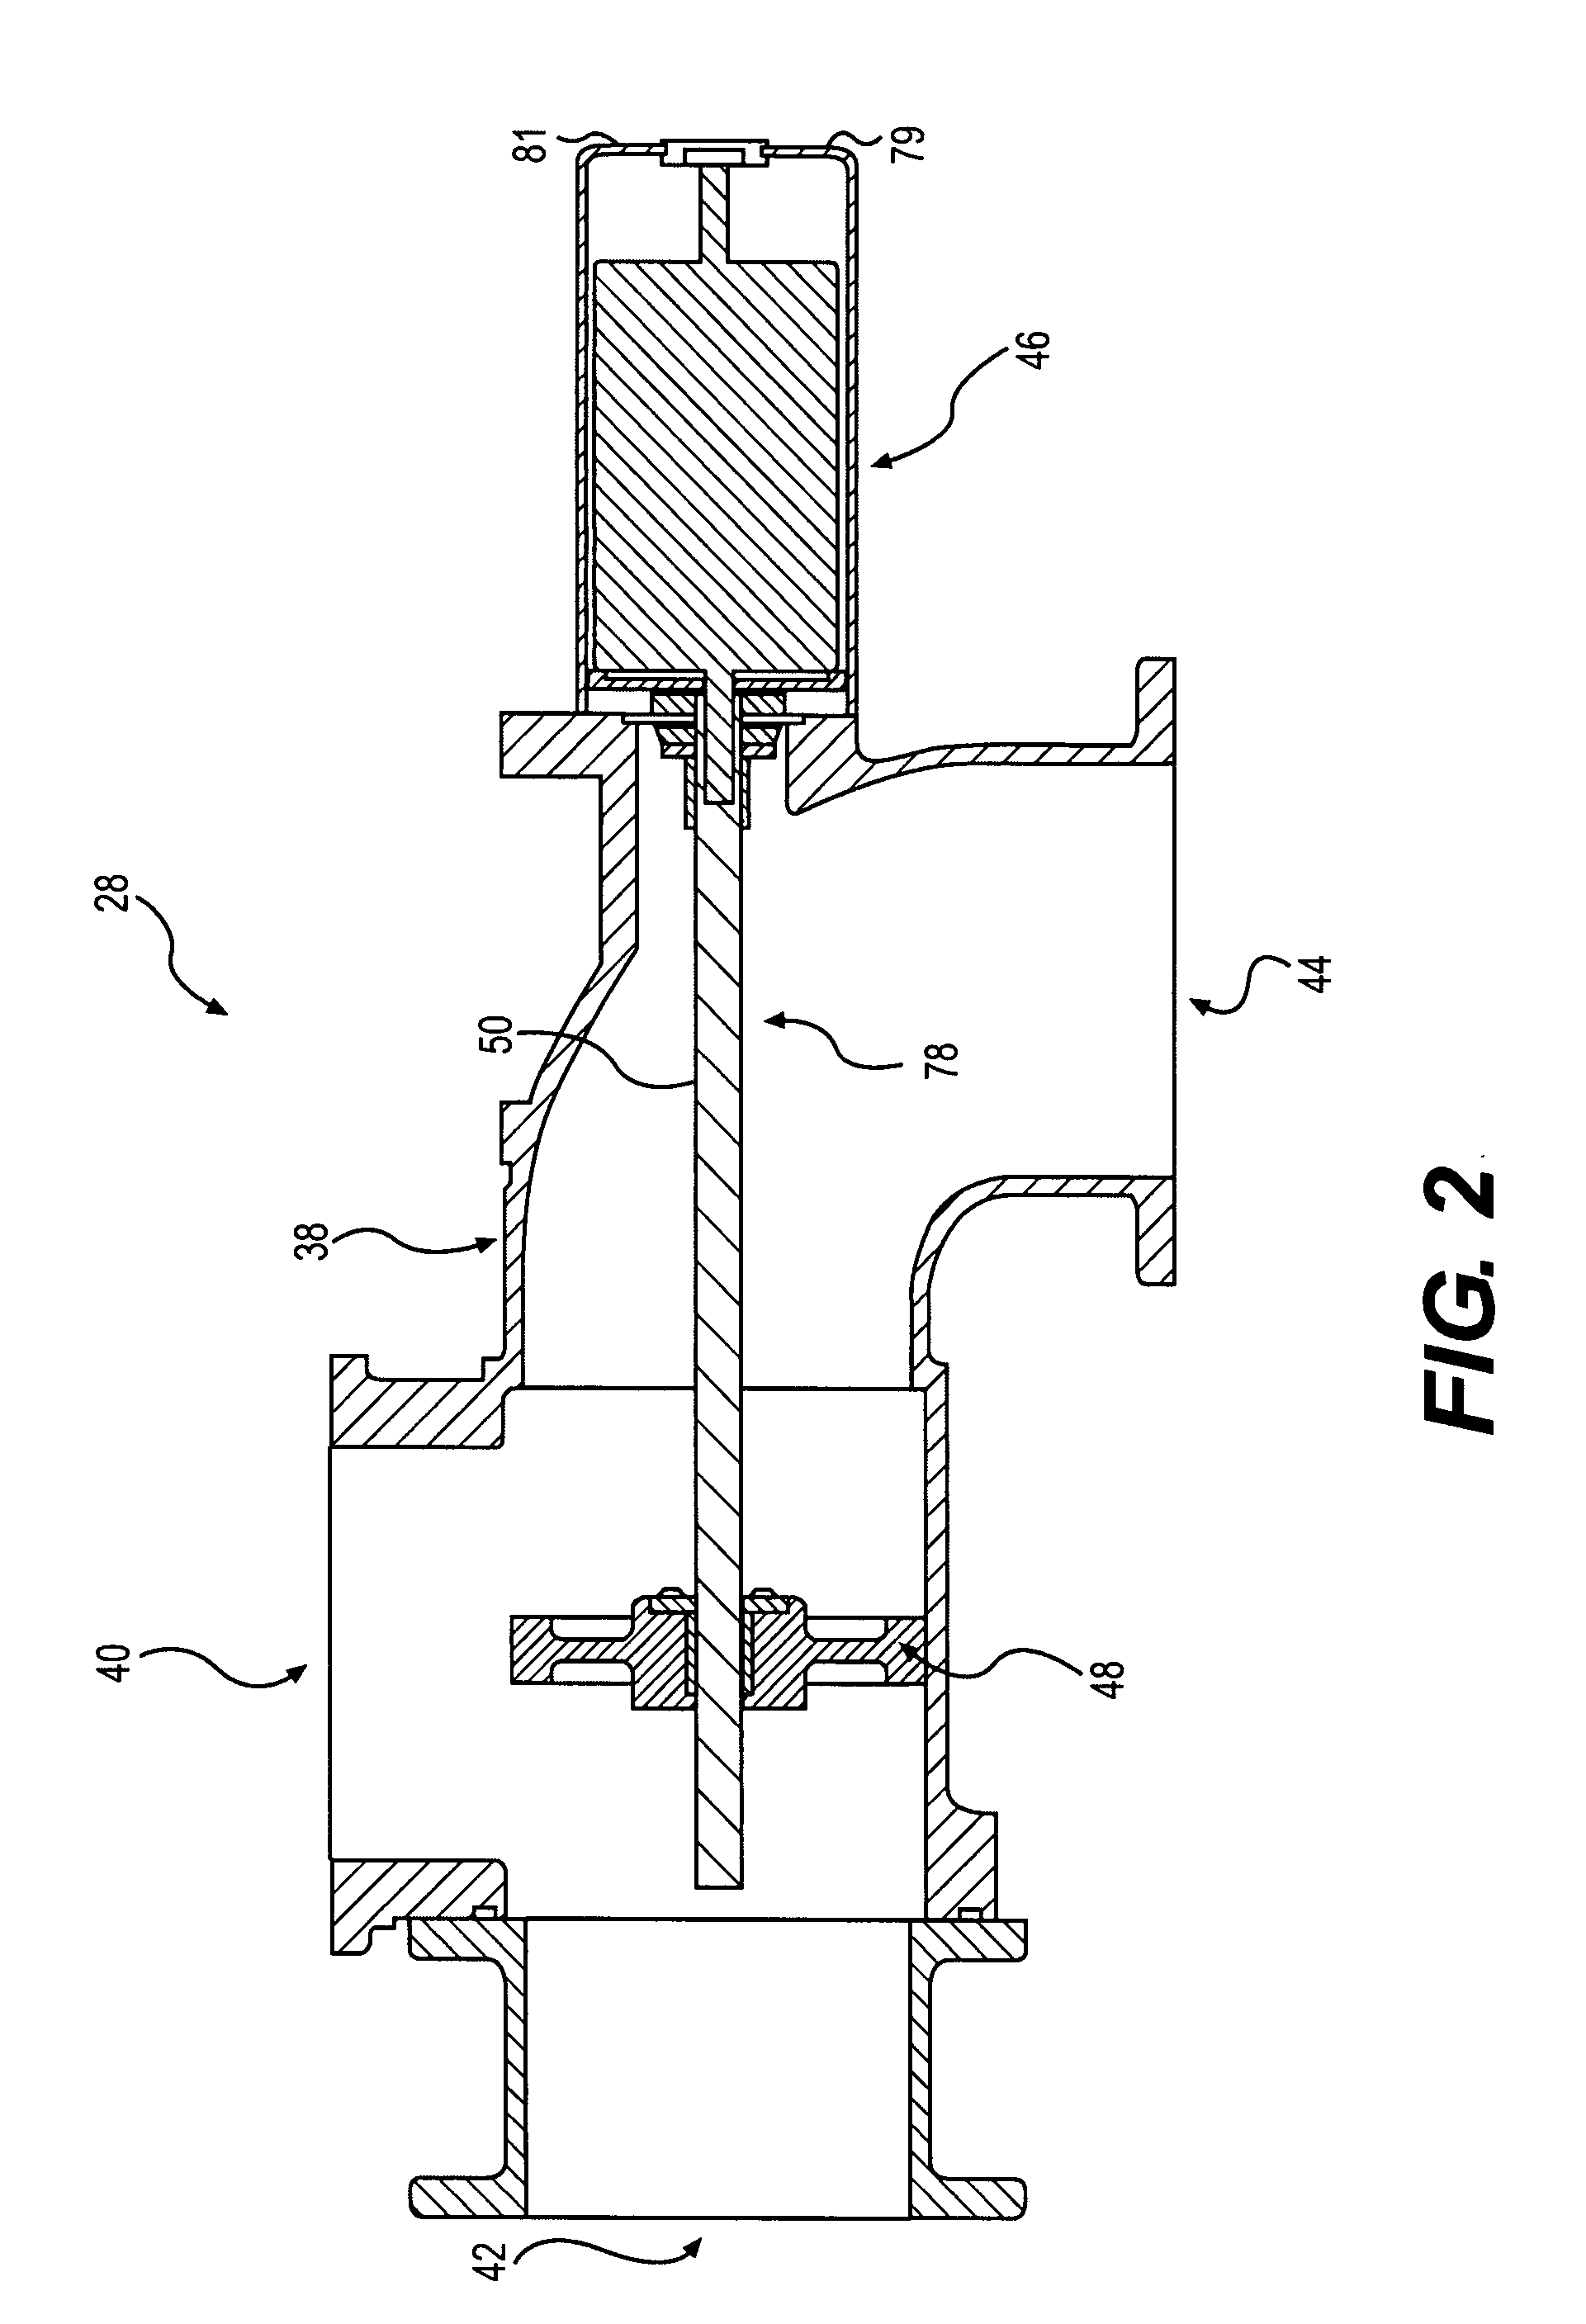 Cooling system having inlet control and outlet regulation